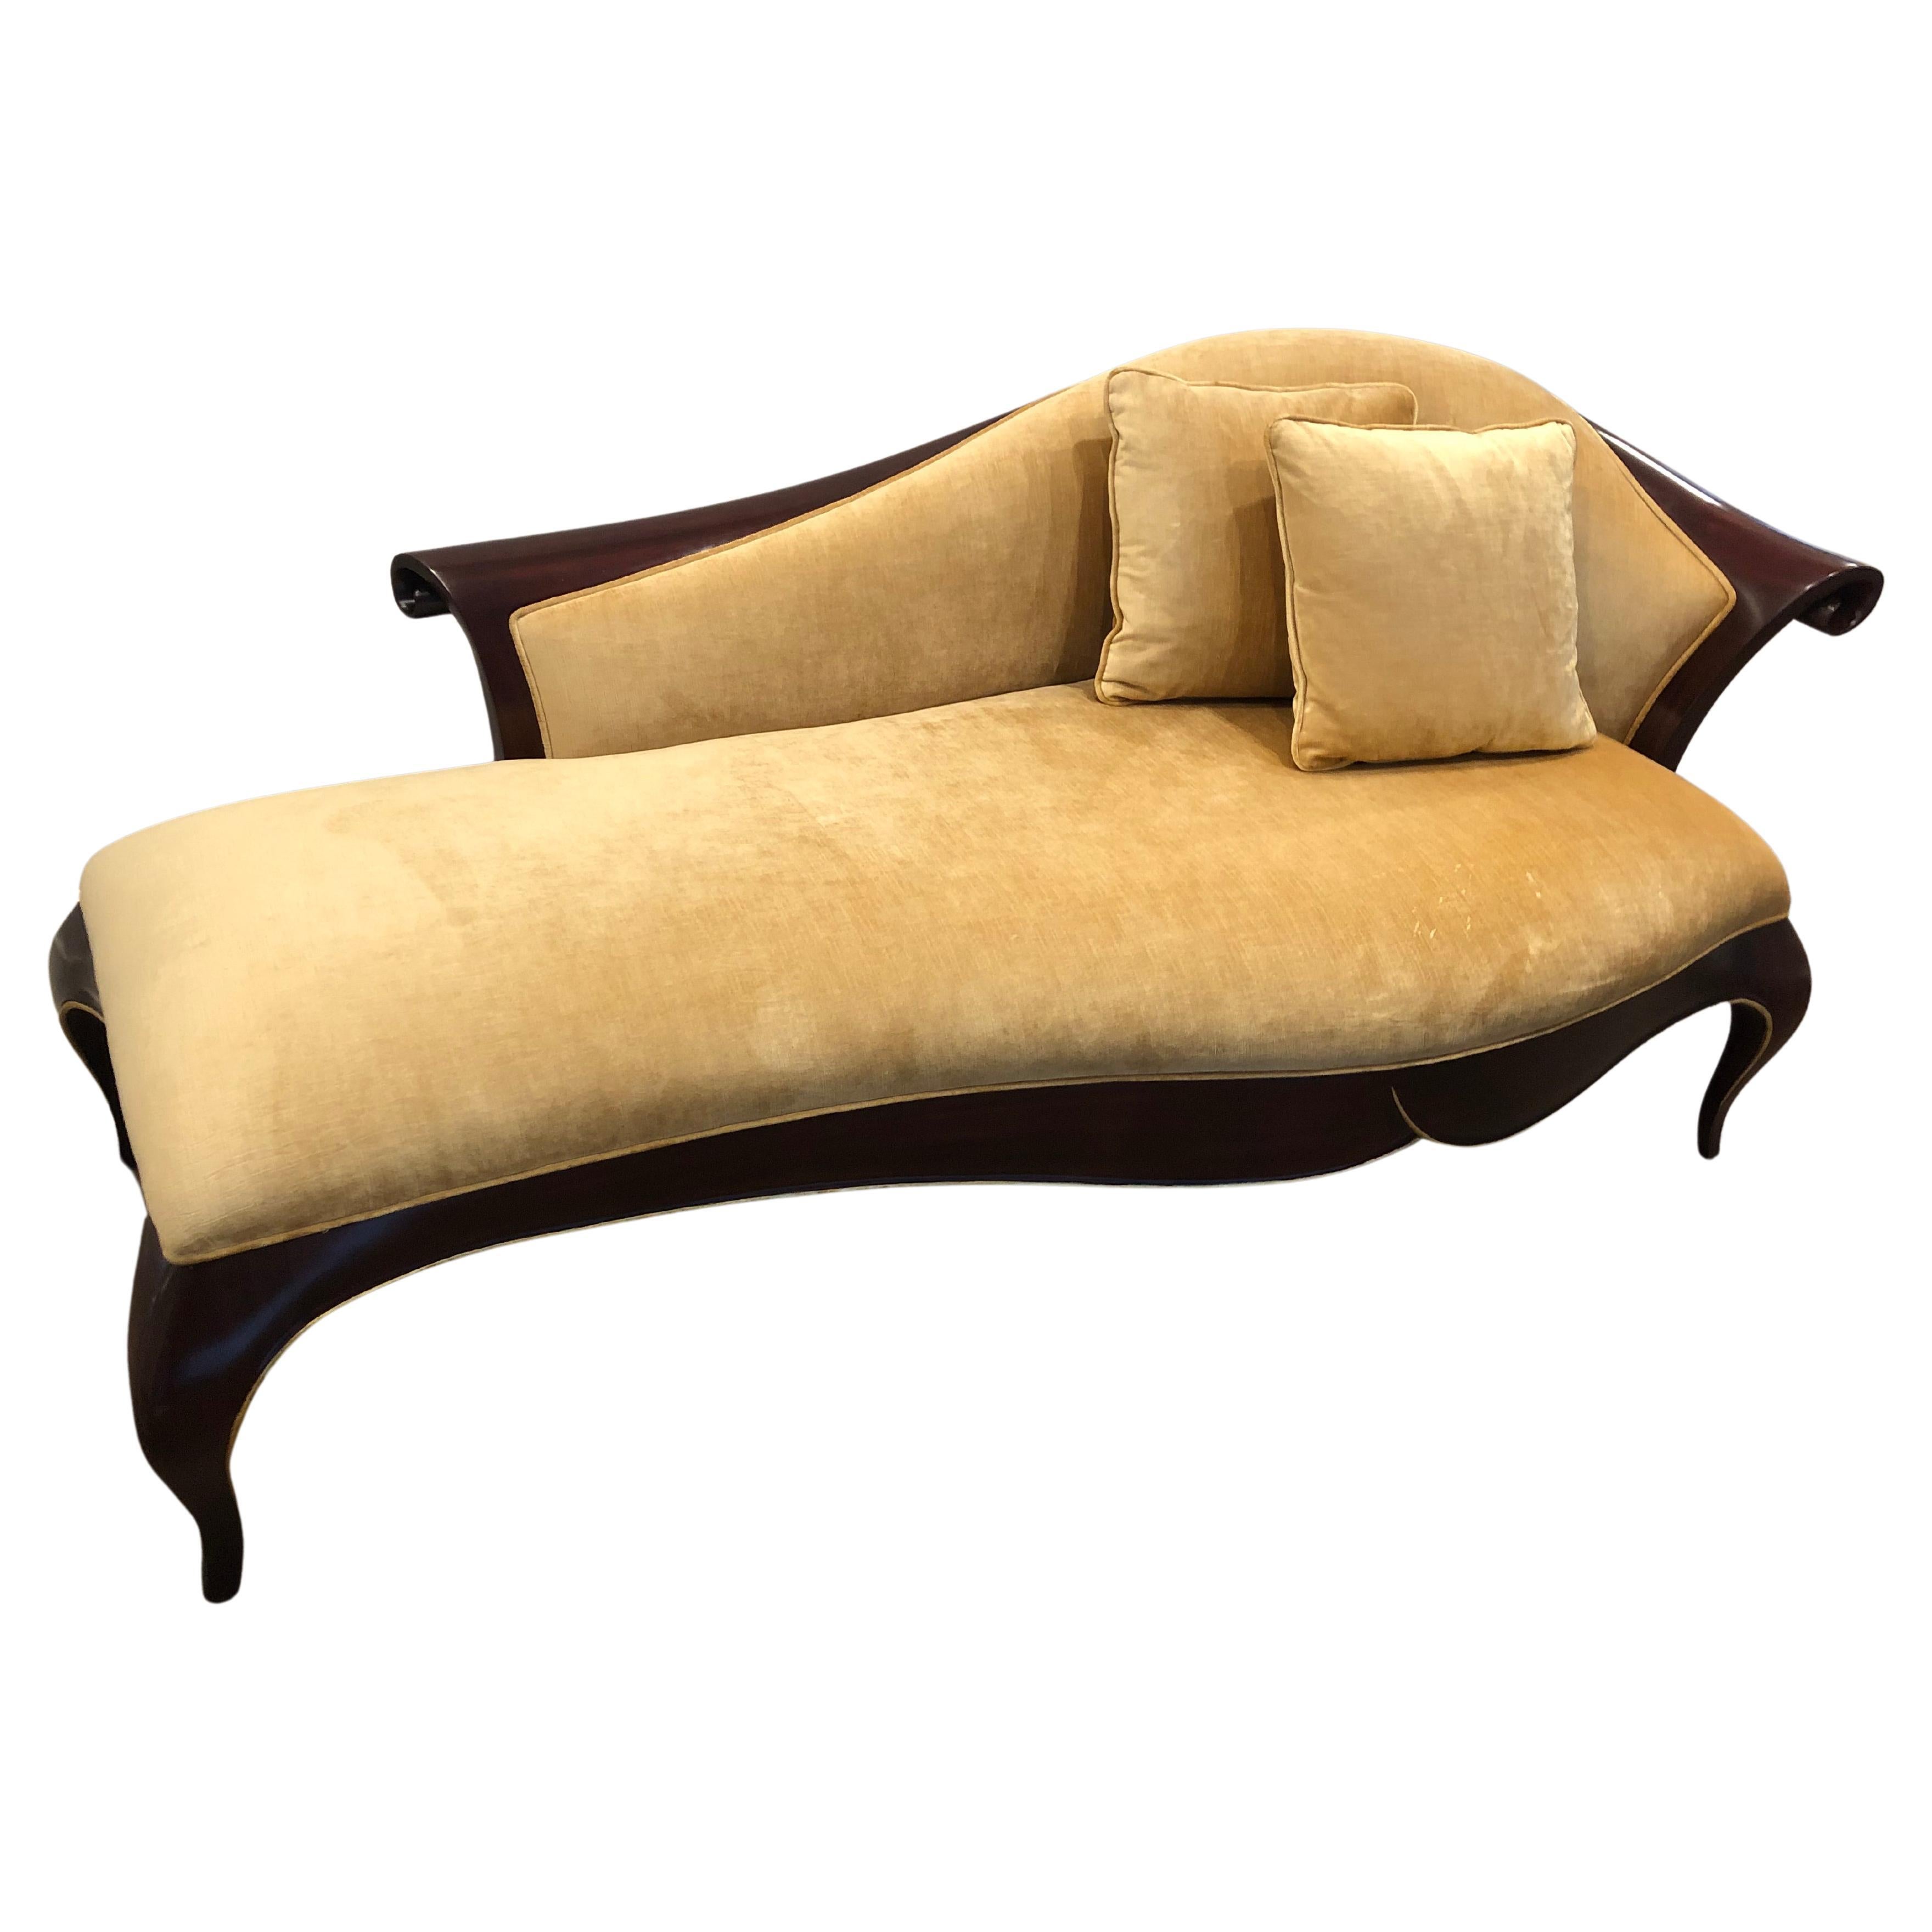 Sensual Luxurious Christopher Guy Sofia Chaise Longue For Sale